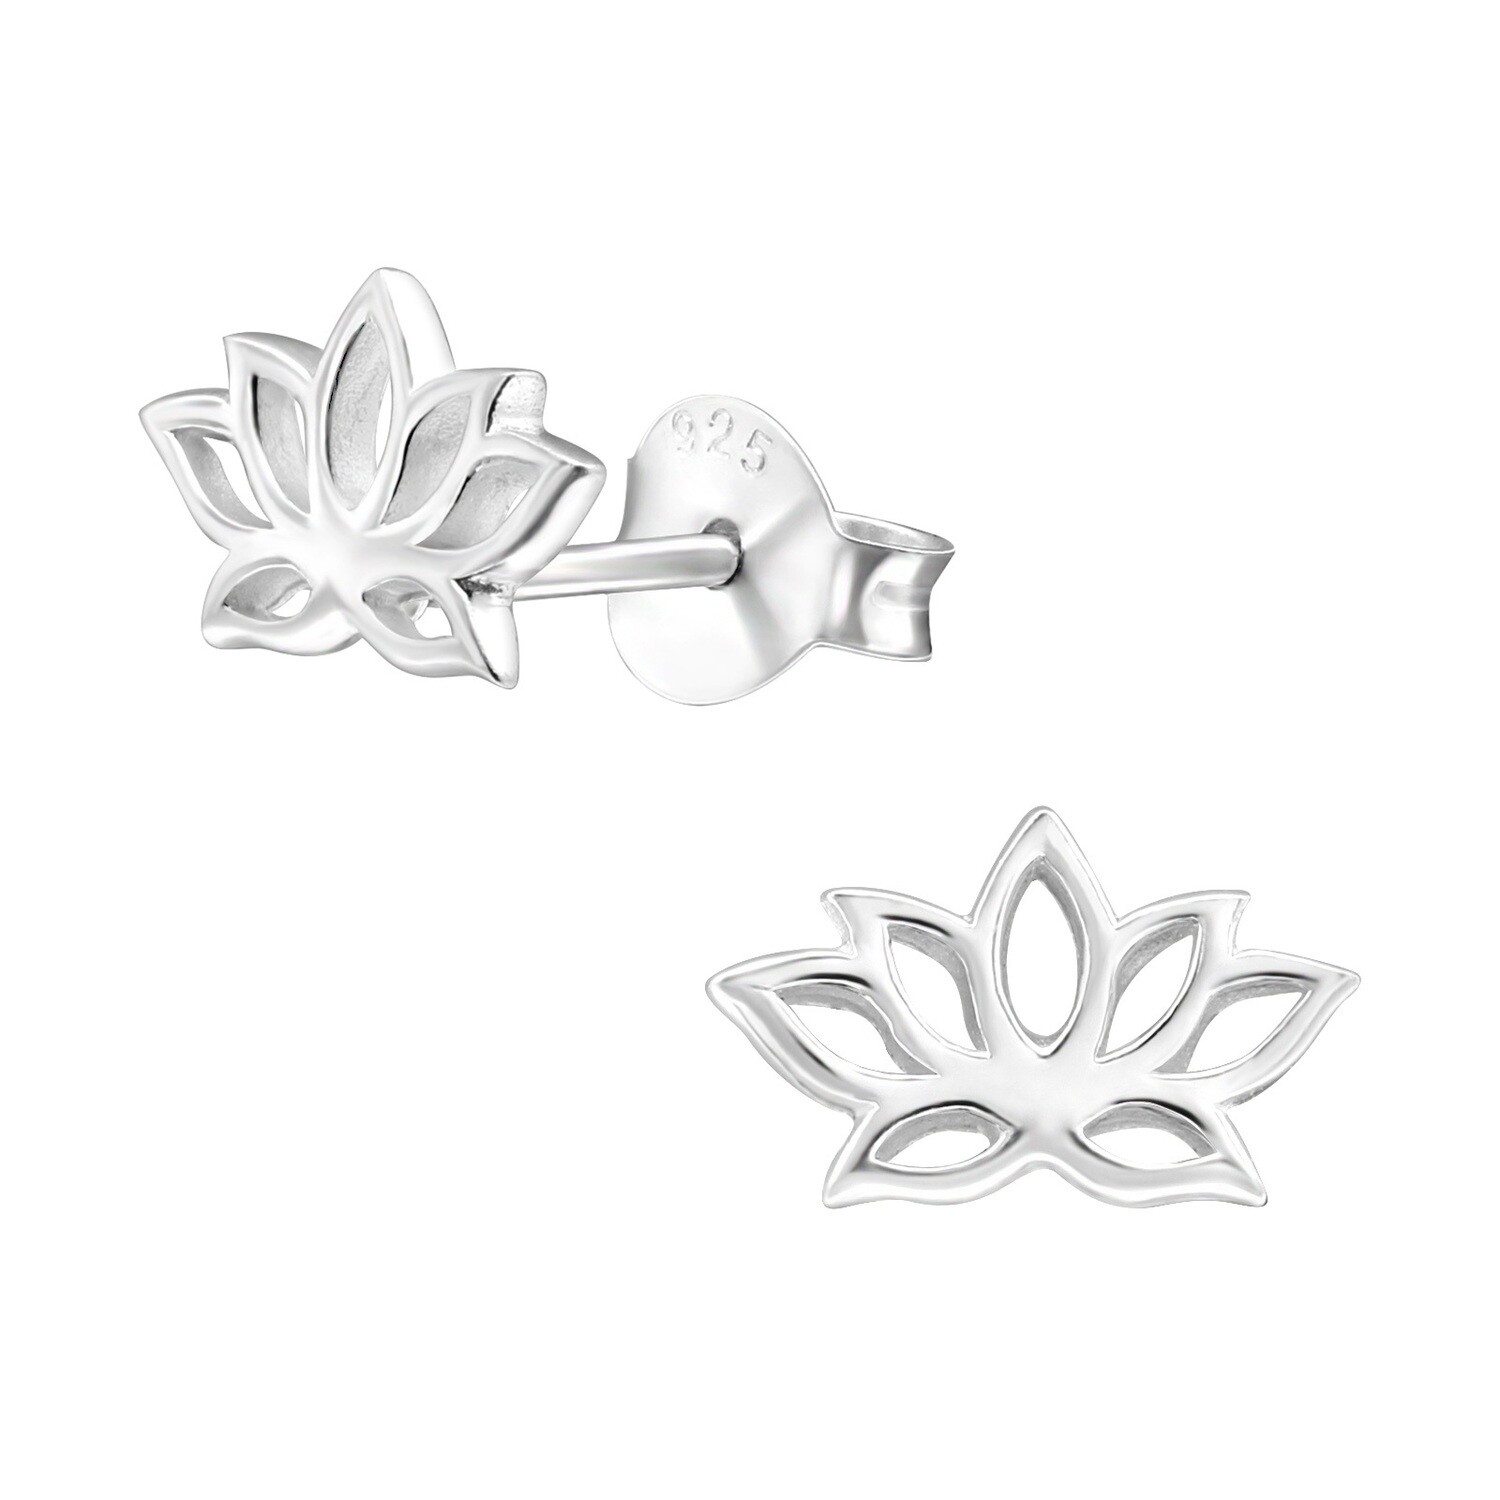 P37-32 Sterling Silver Open Lotus Posts